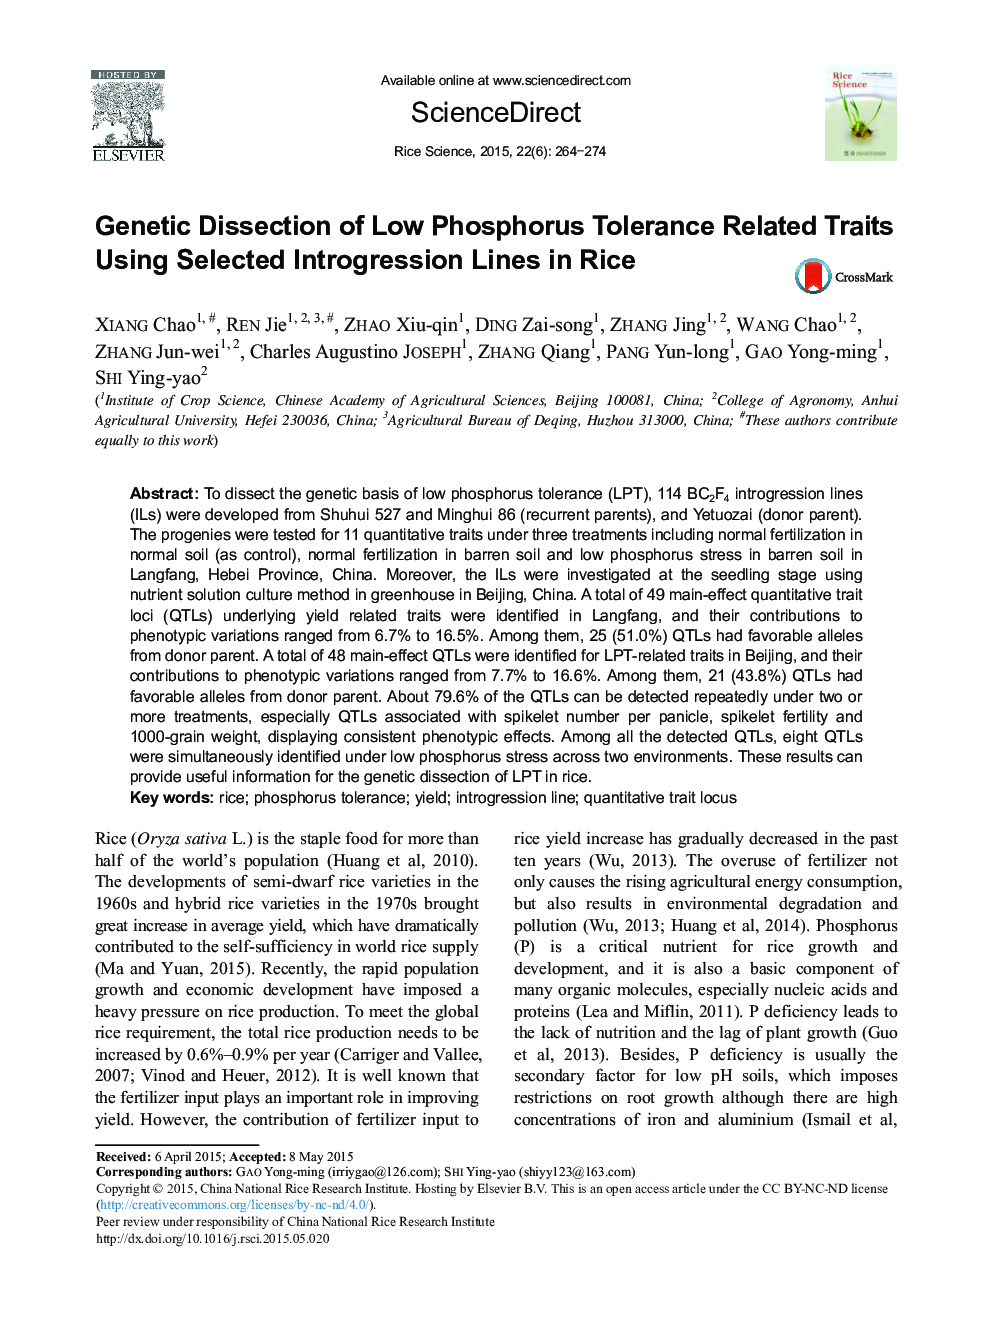 Genetic Dissection of Low Phosphorus Tolerance Related Traits Using Selected Introgression Lines in Rice 